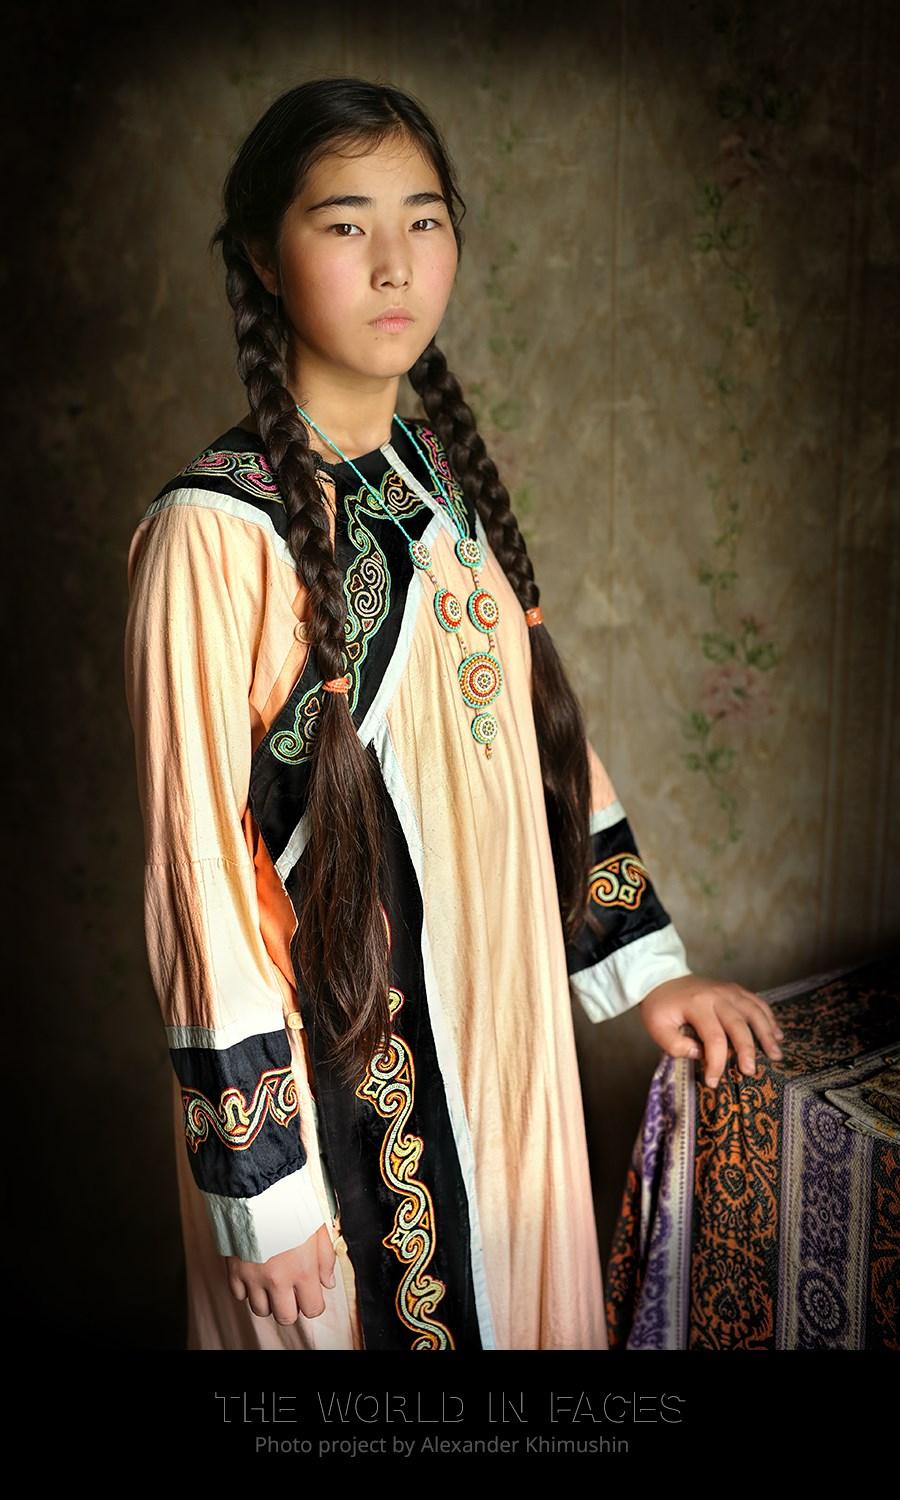 A Uilta indigenous girl from Sakhalin Island of Siberia in traditional clothing (© <a href="https://www.facebook.com/xperimenter">Alexander Khimushin</a> / The World In Faces)